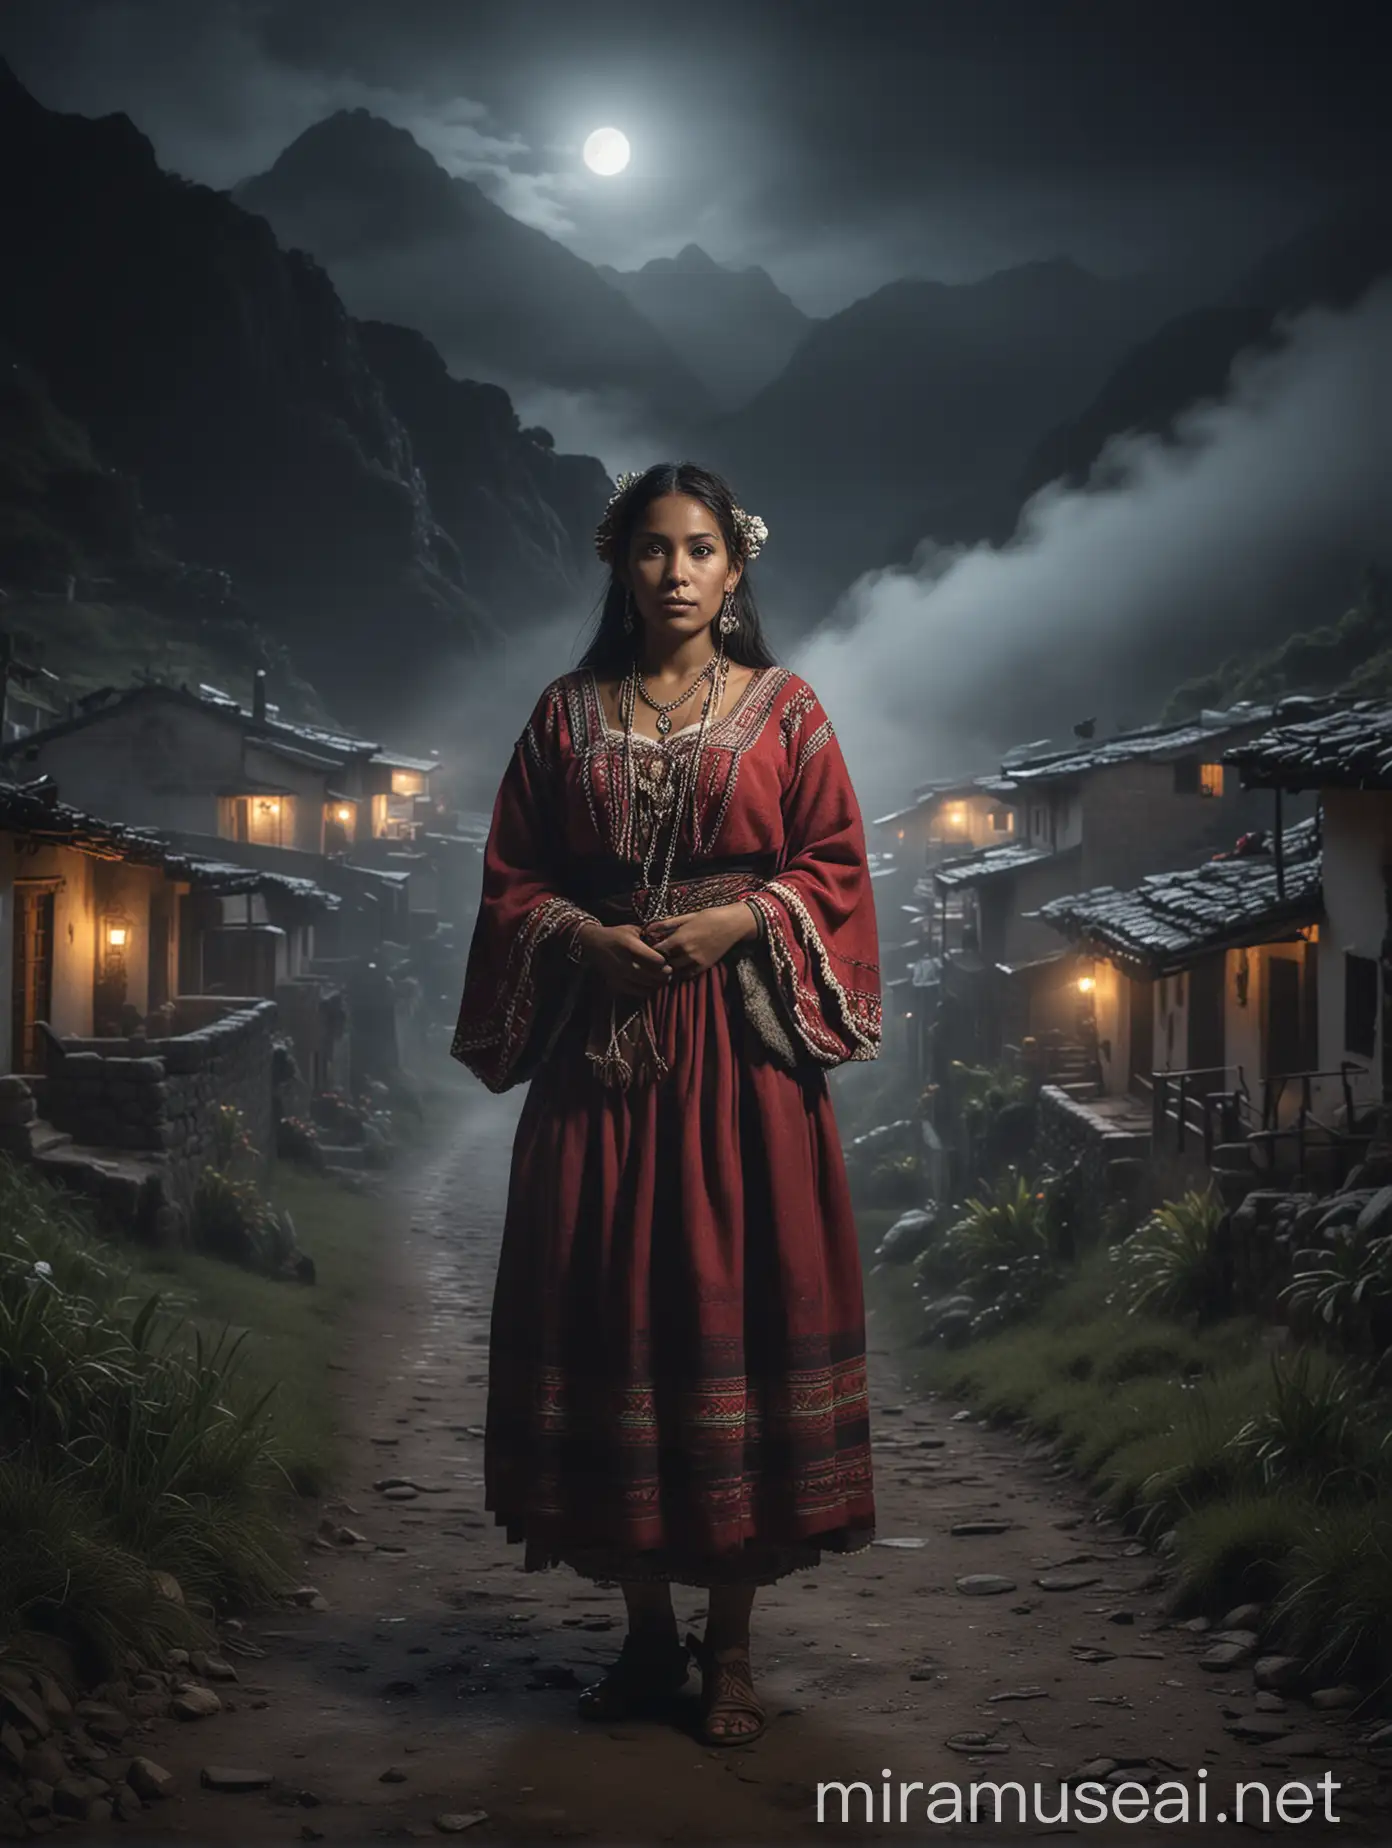 Peruvian woman in a mountain village, traditional clothing, sexy, at night, moonlight, regal, dense fog, epic, cinematic, atmospheric